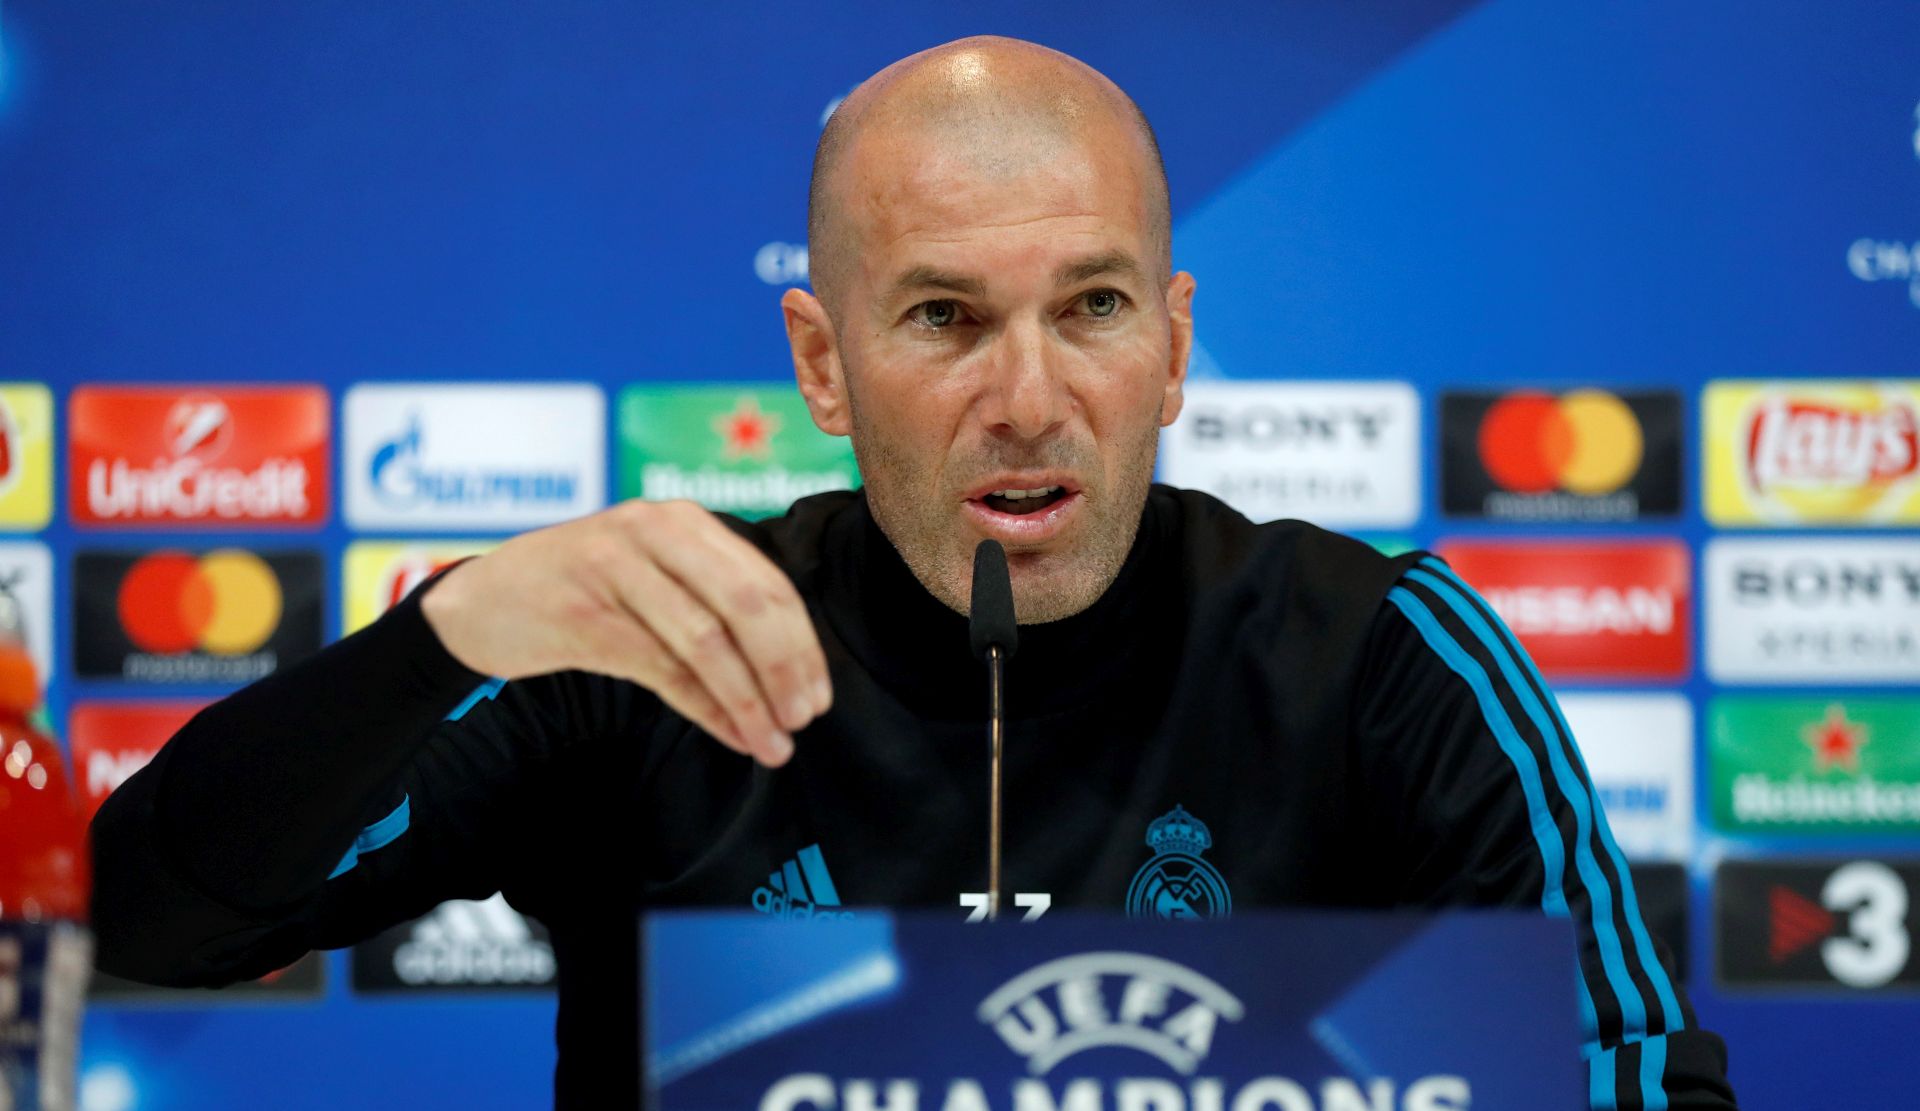 epa06702420 Real Madrid's head coach Zinedine Zidane speaks during a press conference at Valdebebas sports facilities in Madrid, Spain, 30 April 2018. Real Madrid will face Bayern Munich in their UEFA Champions League semi finals second leg match on  the upcoming 01 May at Santiago Bernabeu stadium in the Spanish capital.  EPA/CHEMA MOYA